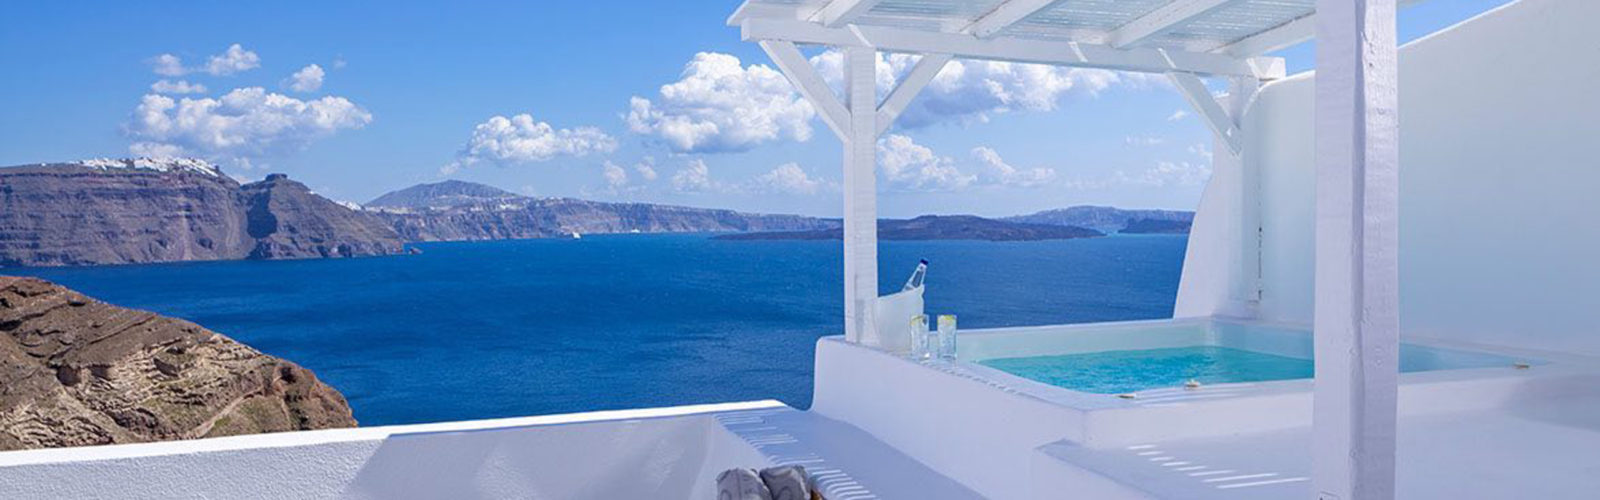 canaves_oia_hotel_view